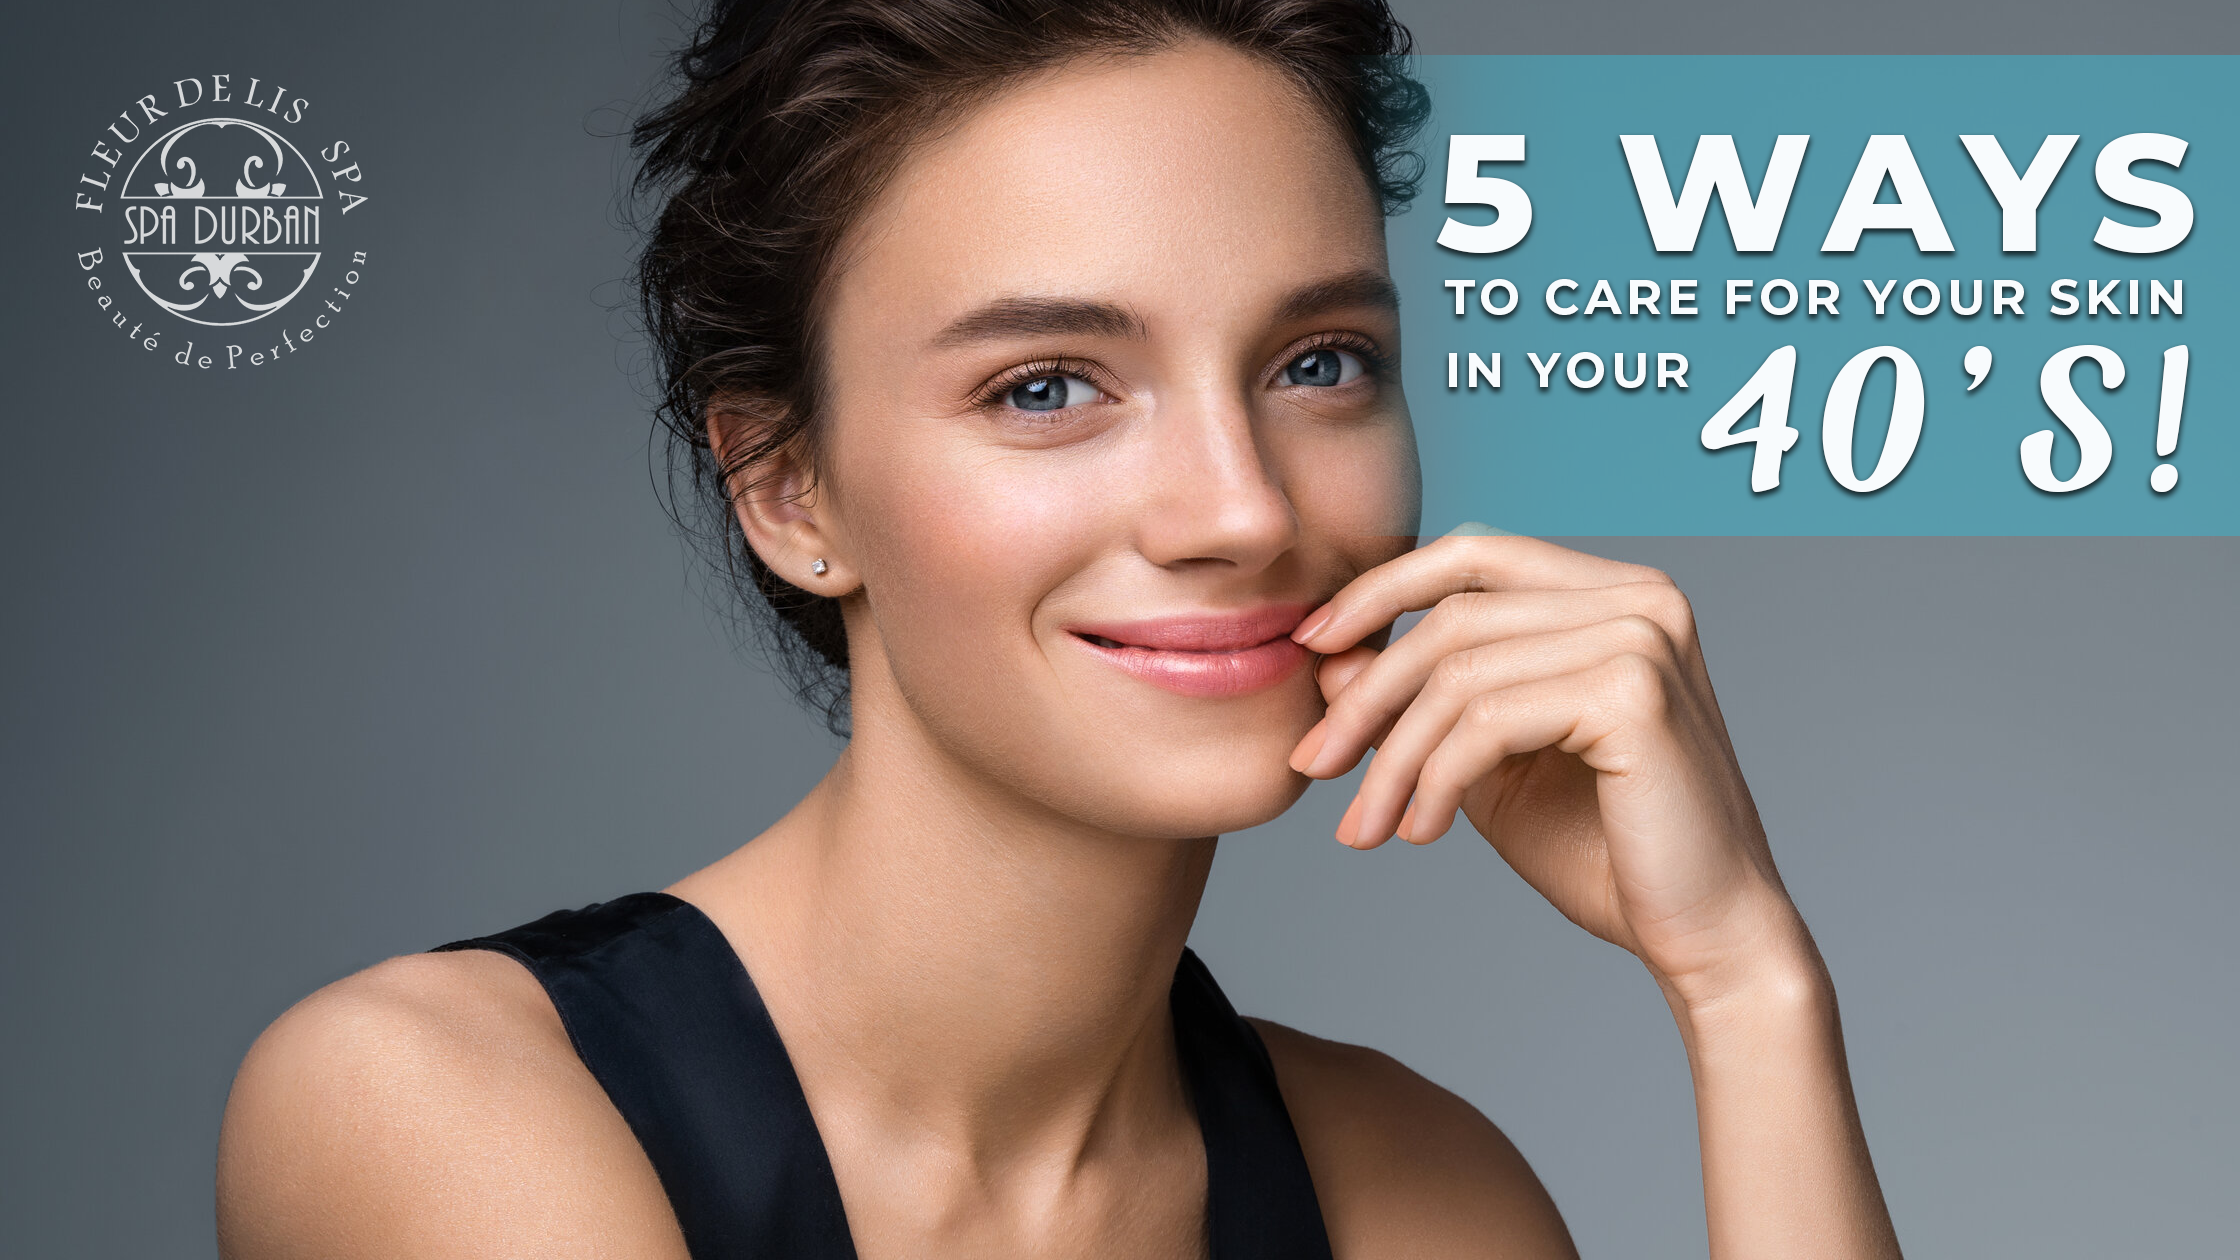 5 Ways to Care for Your Skin in Your 40s!